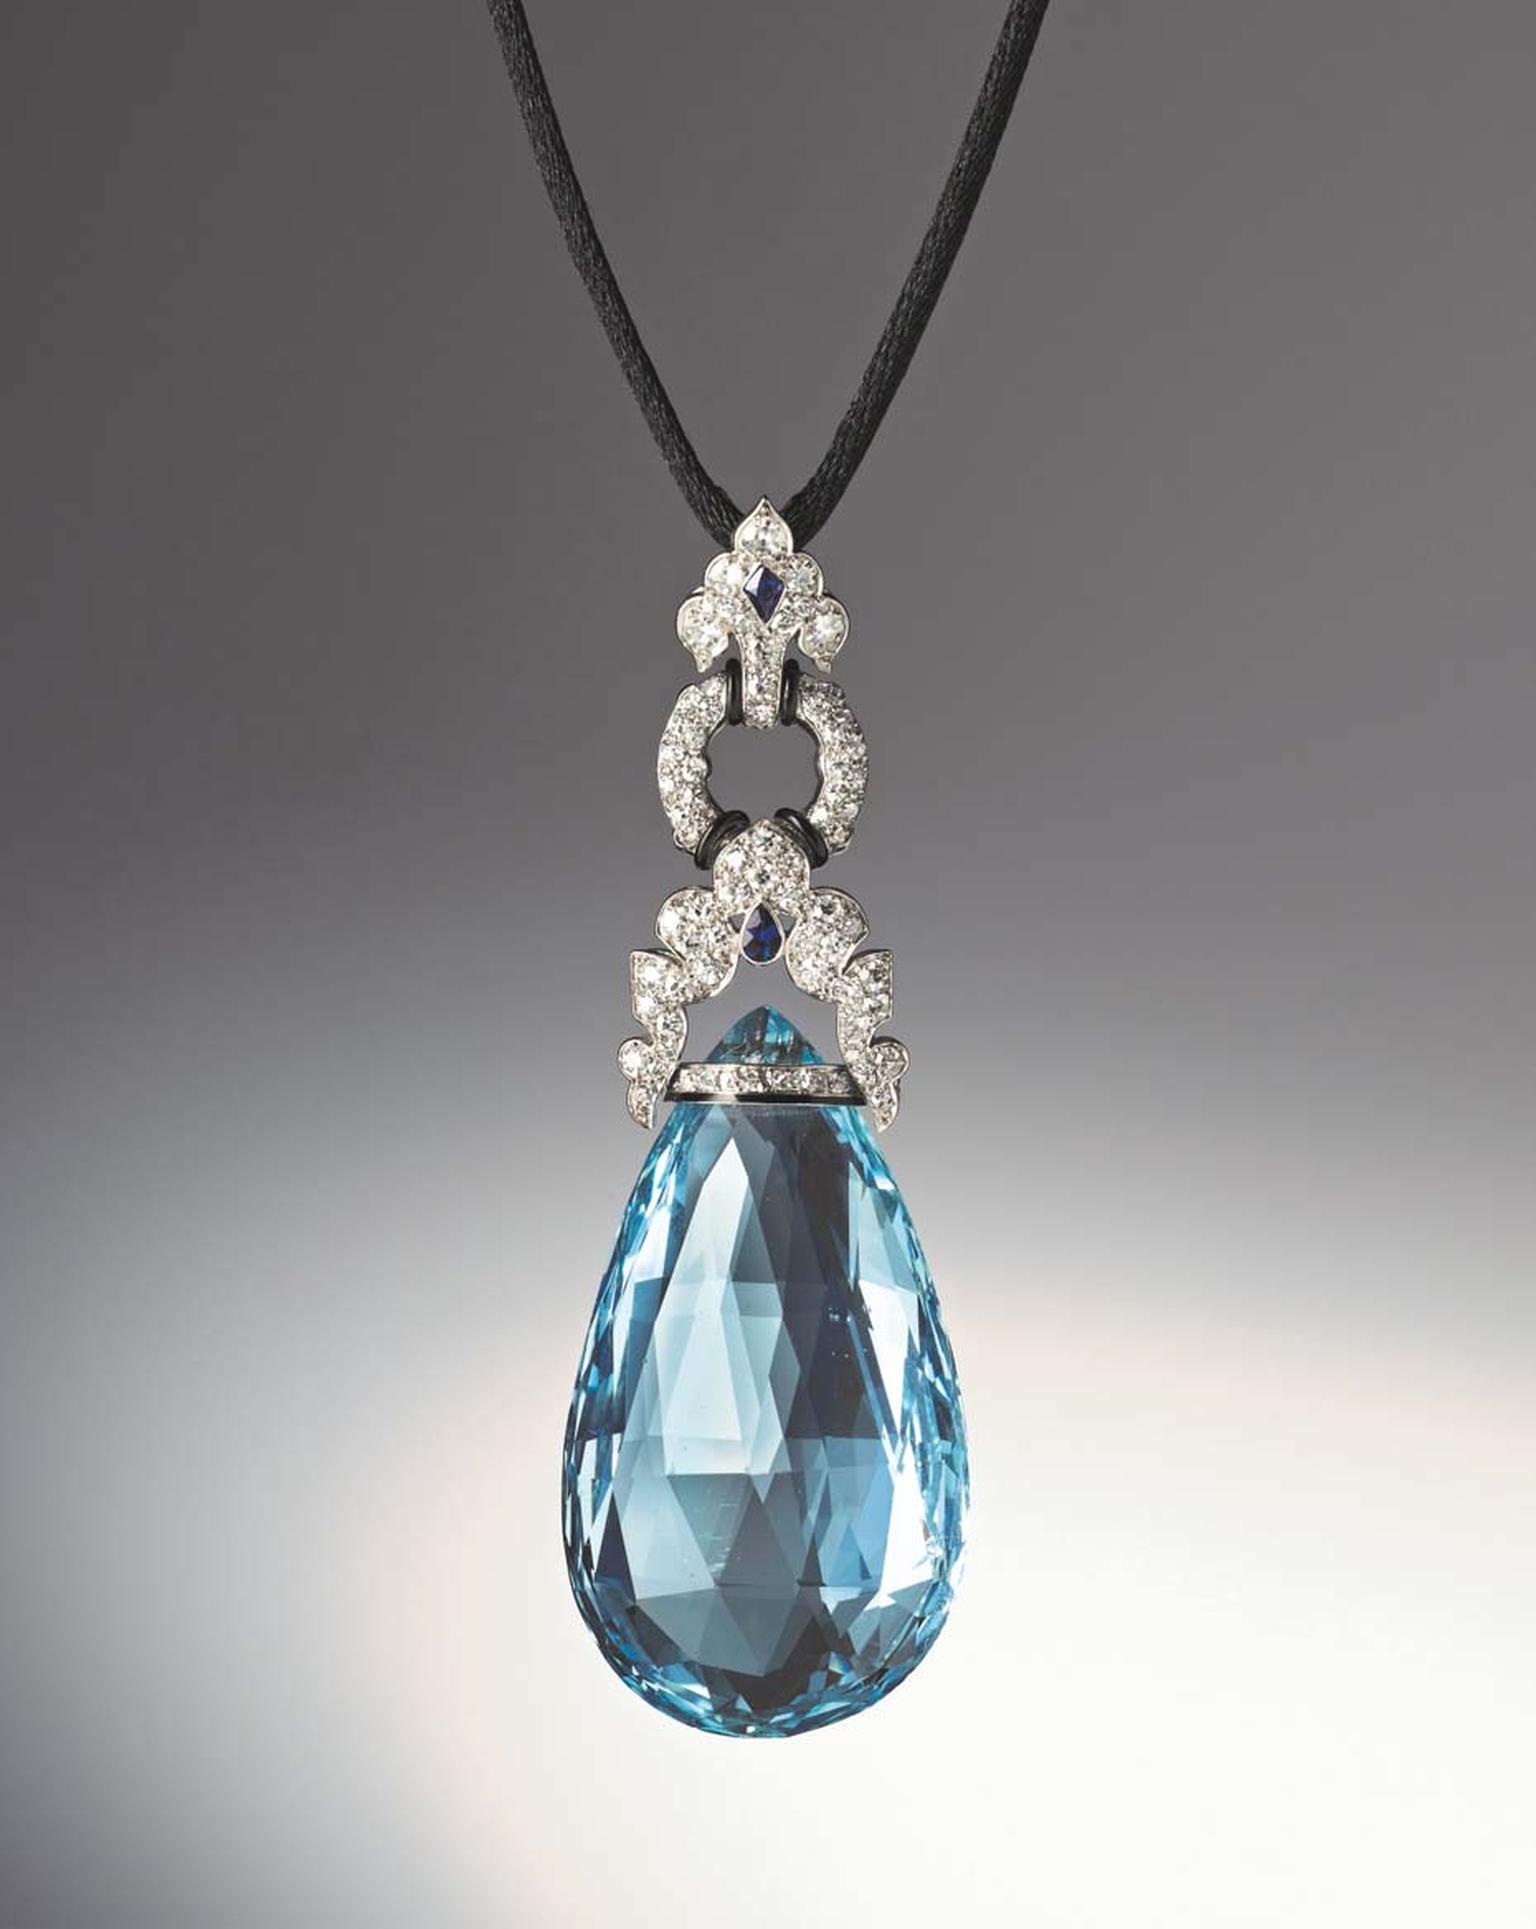 Art Deco aquamarine briolette pendant set with diamonds, two fancy-cut sapphires, as well as bands of black enamel set in platinum by Marzo, Paris, circa 1925 at Hancocks in 2015.